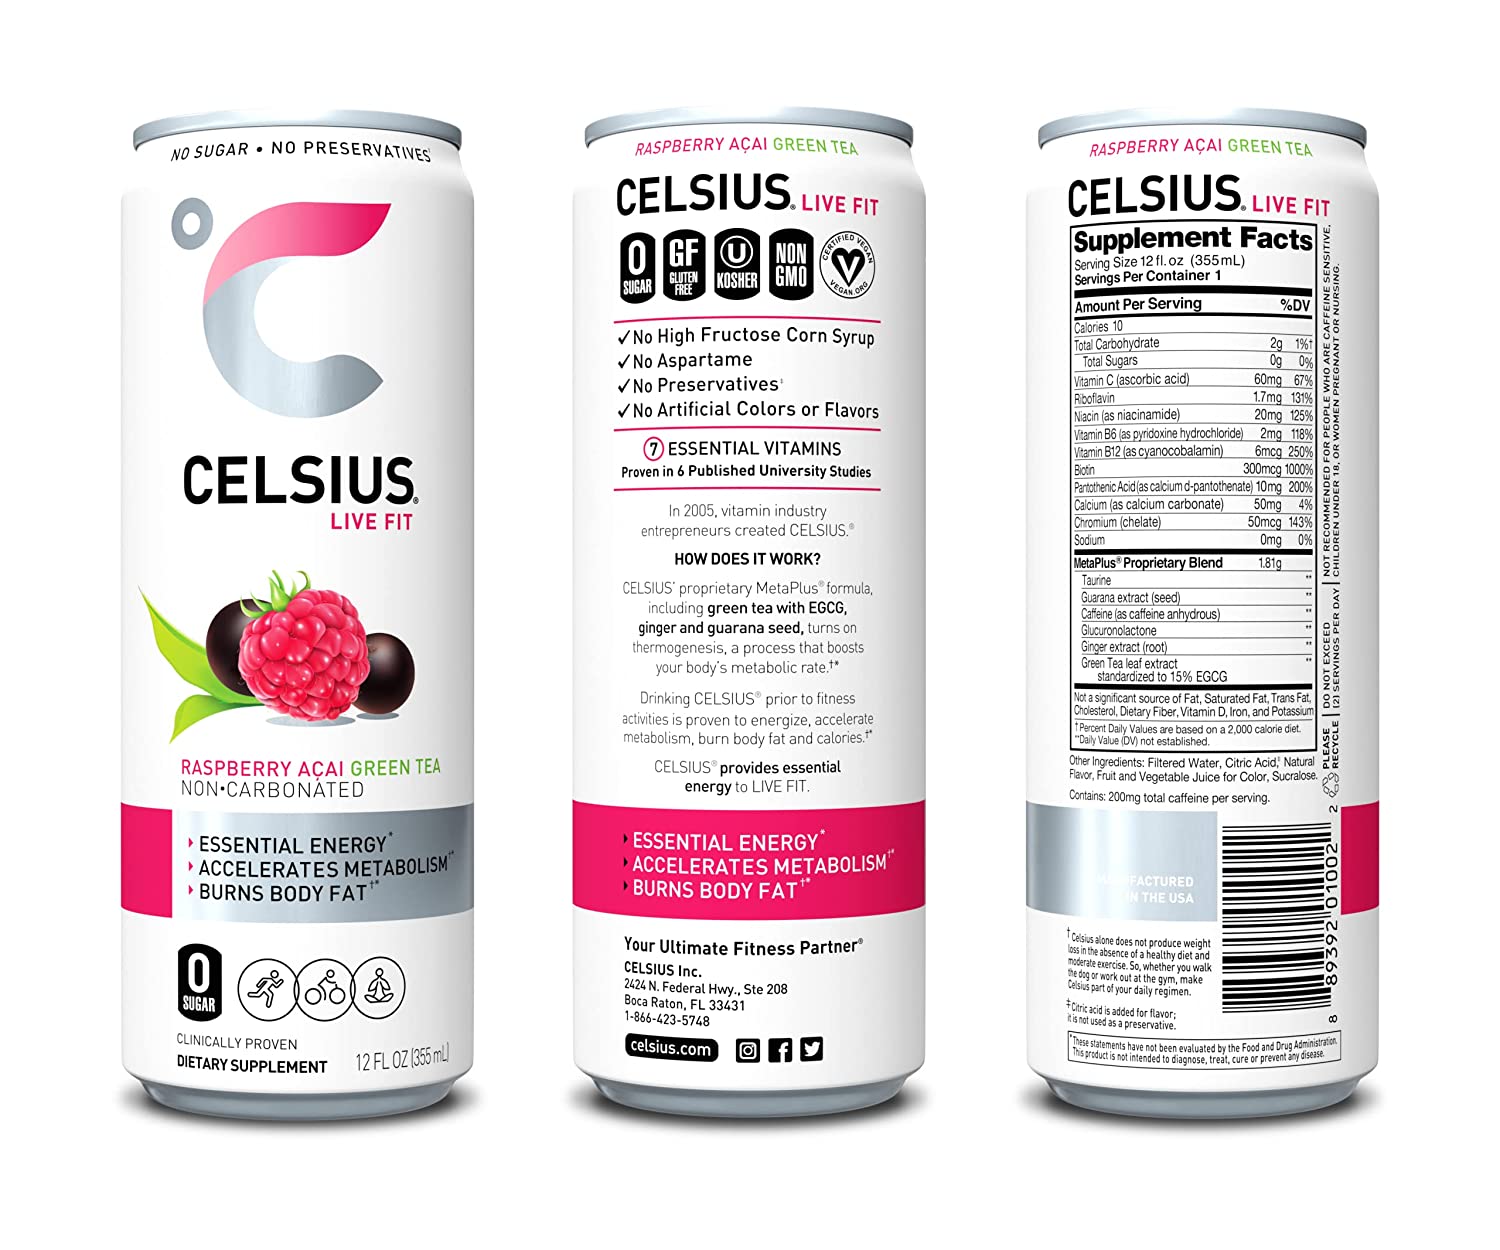 Celsius Live Fit Non-Carbonated Raspberry Acai Green Tea / Pack of 12